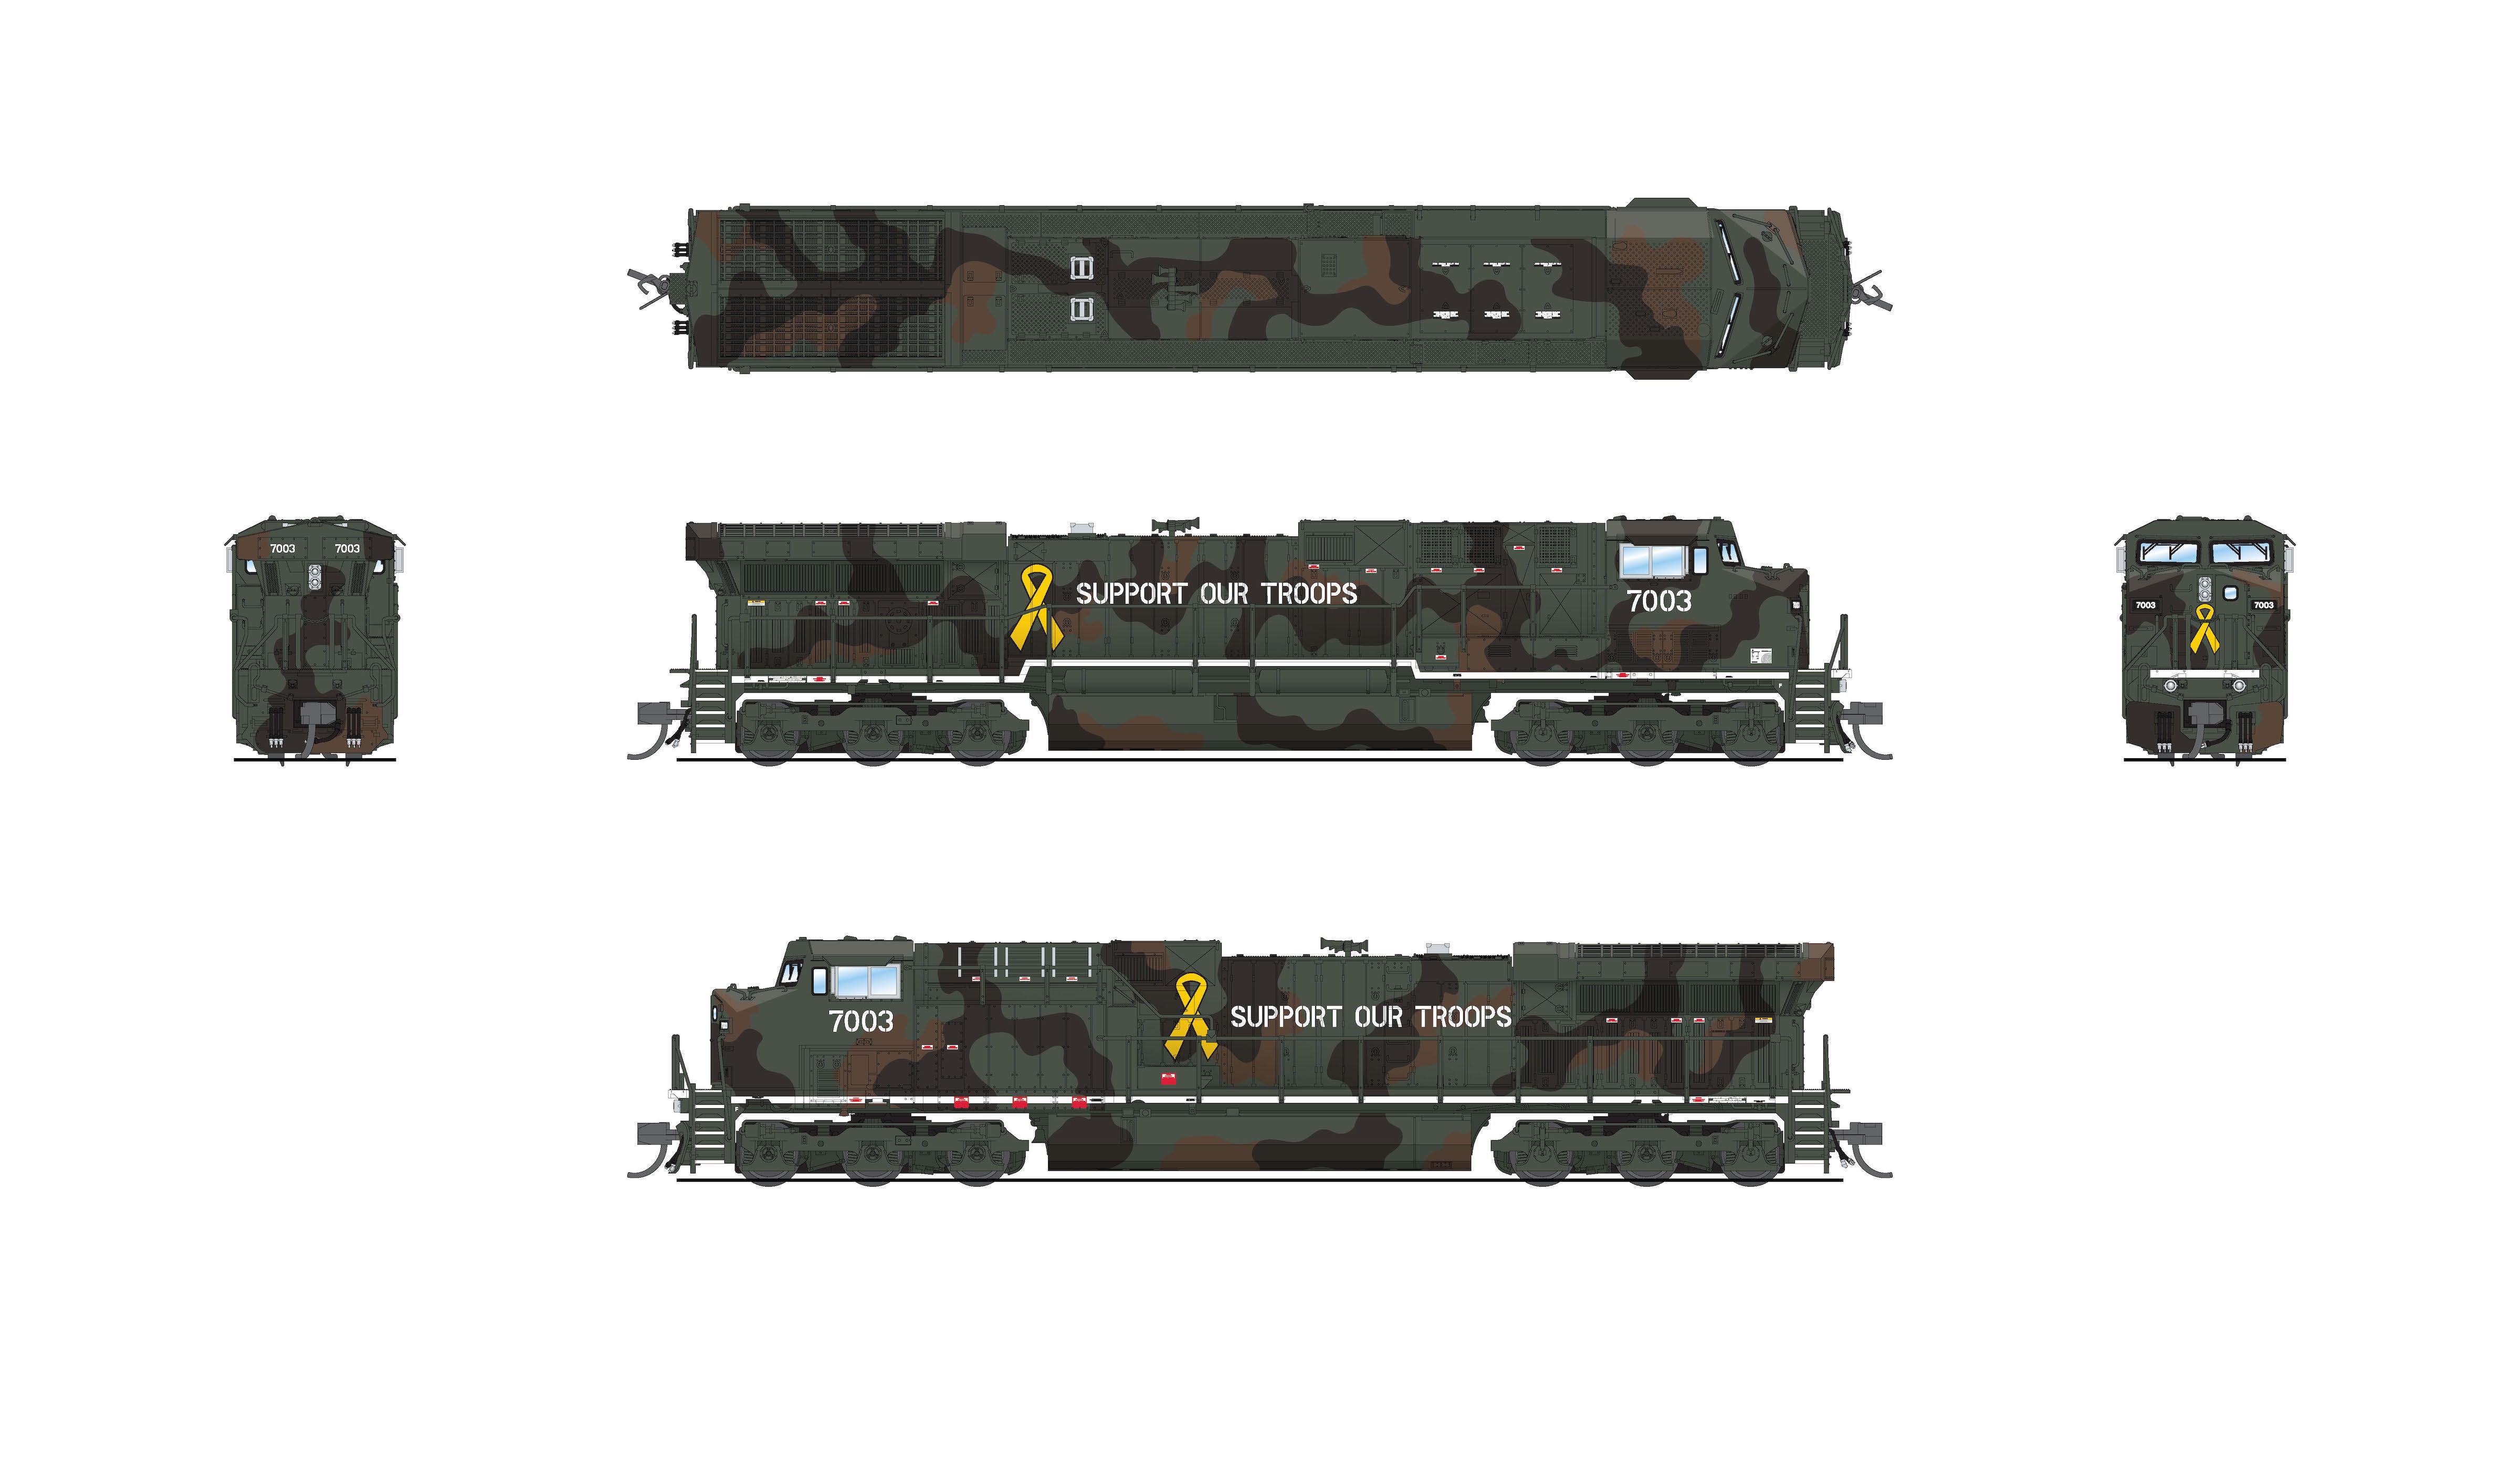 8605 GE AC6000, "Support Our Troops" Fantasy Paint, No-Sound / DCC-Ready, N